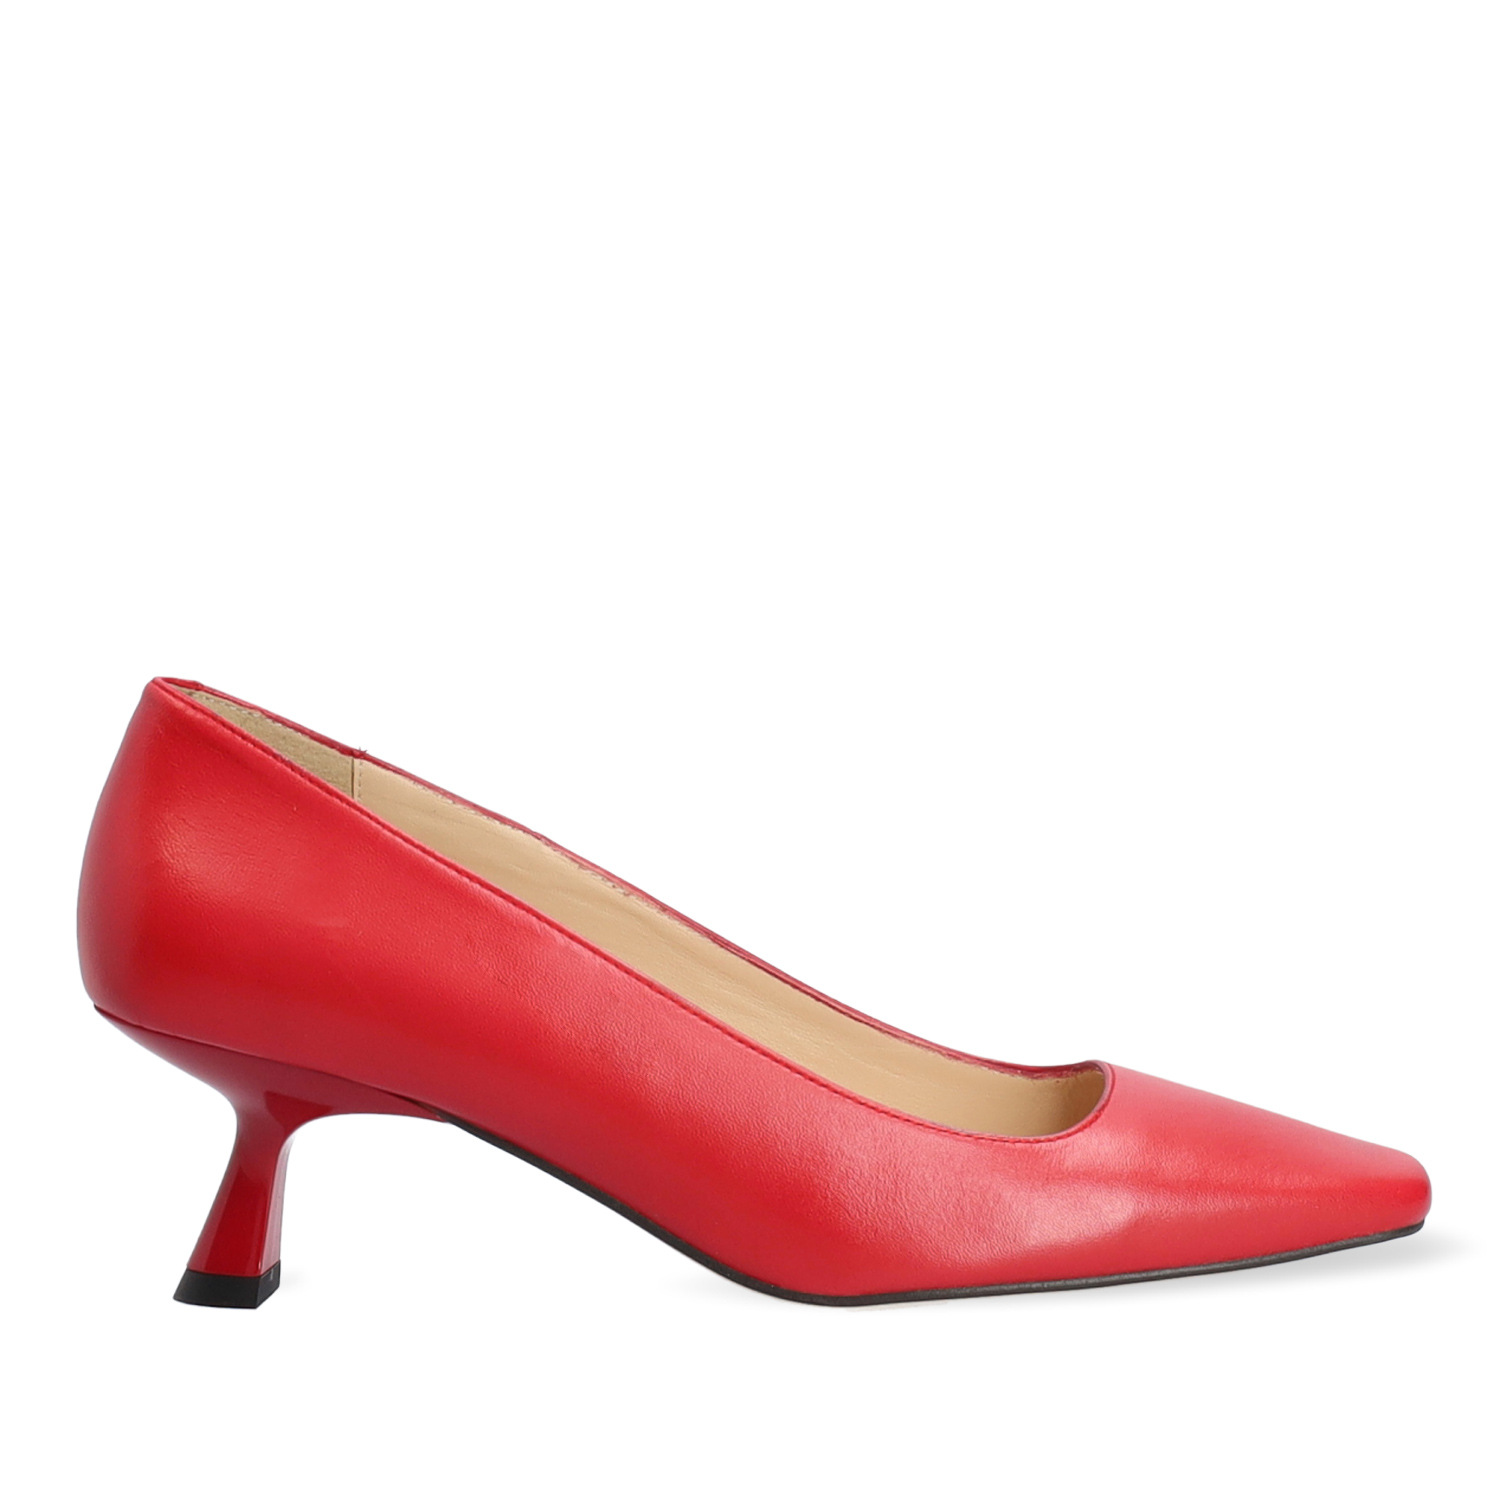 Heeled shoes in red leather 